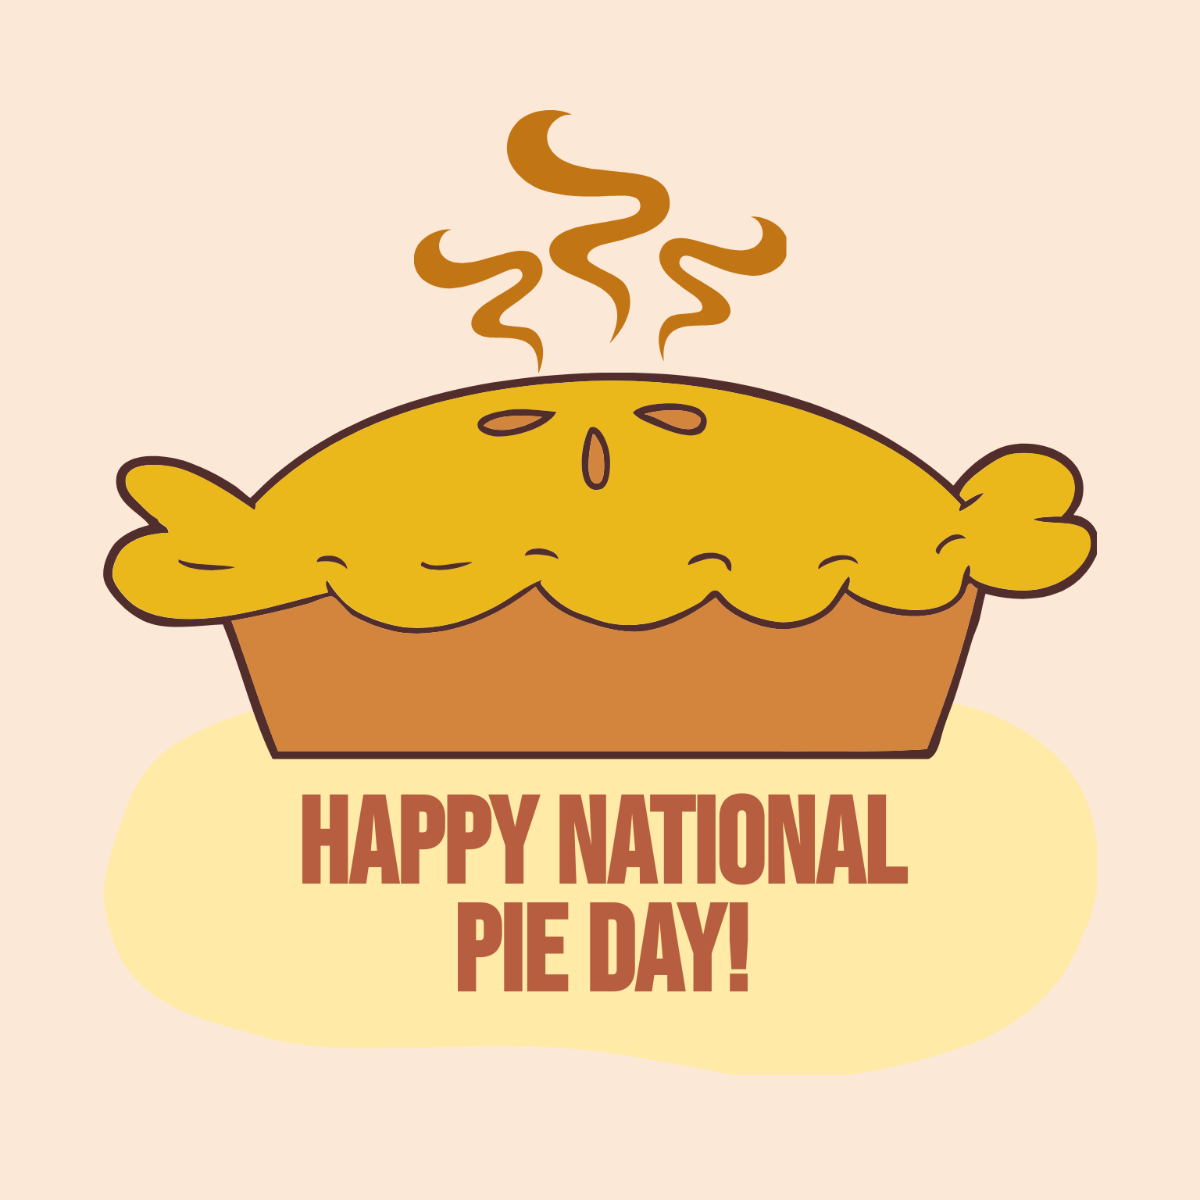 Happy National Pie Day Illustration Template